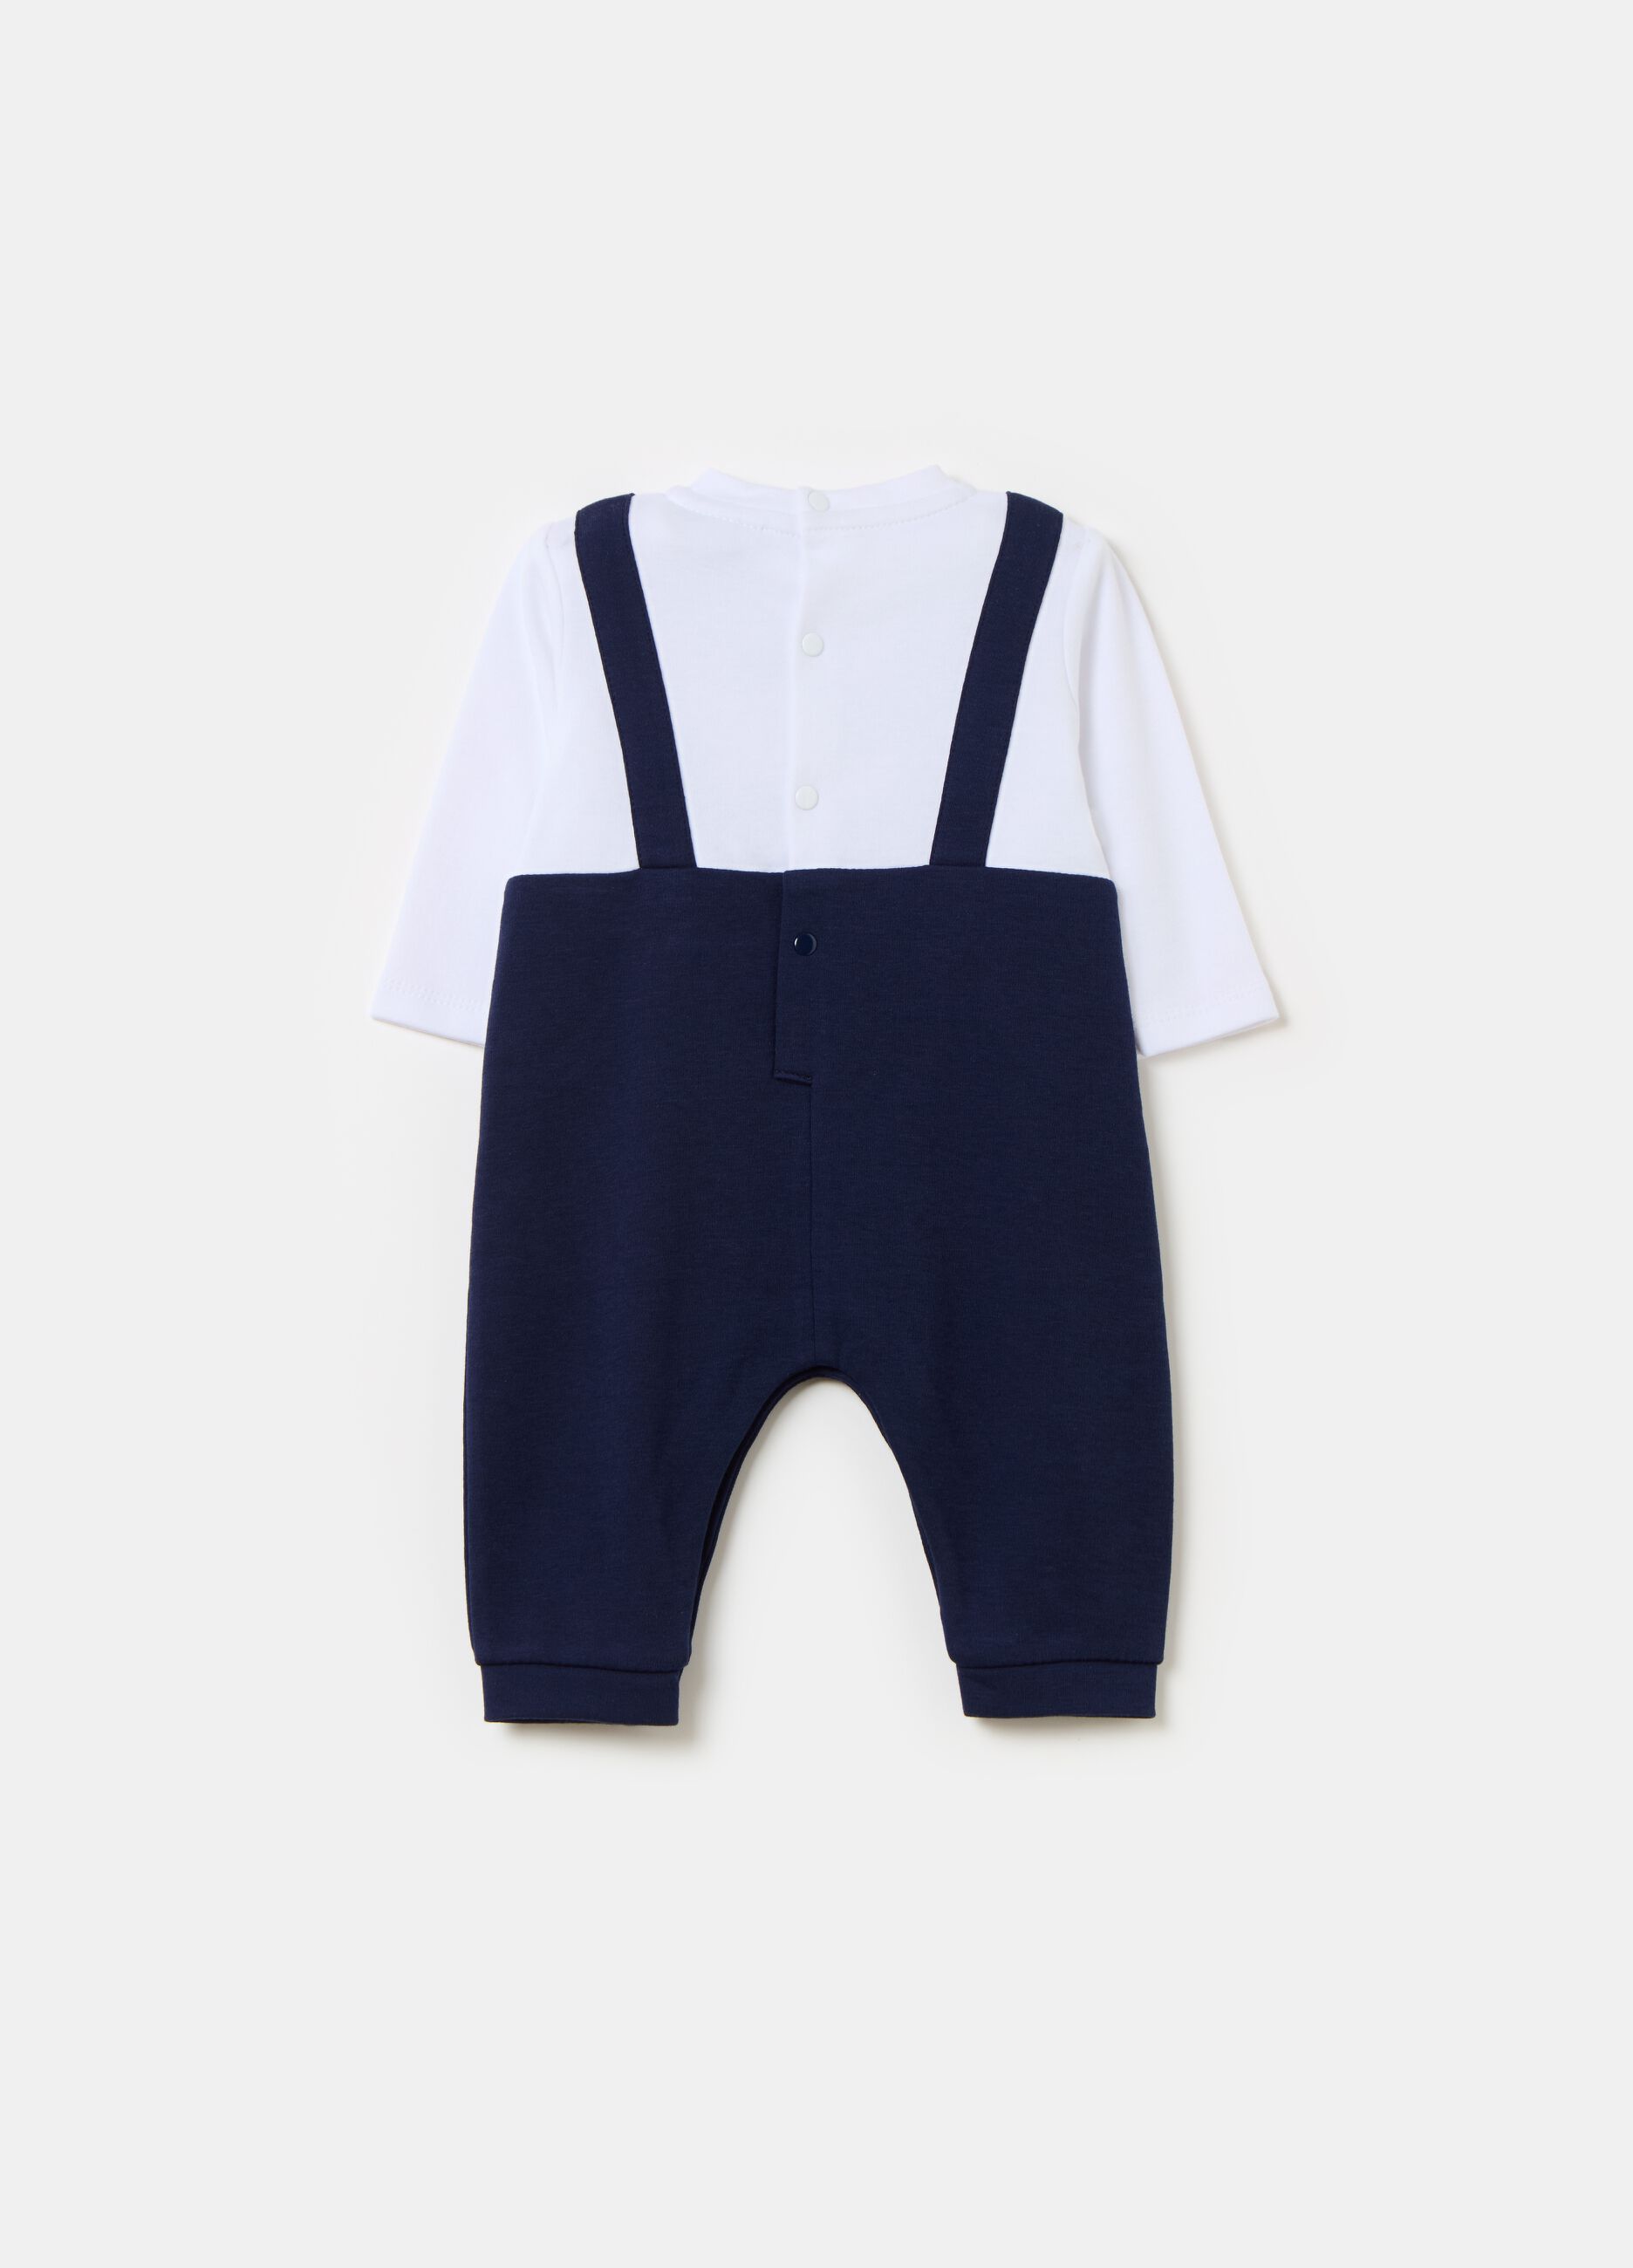 Organic cotton onesie with application